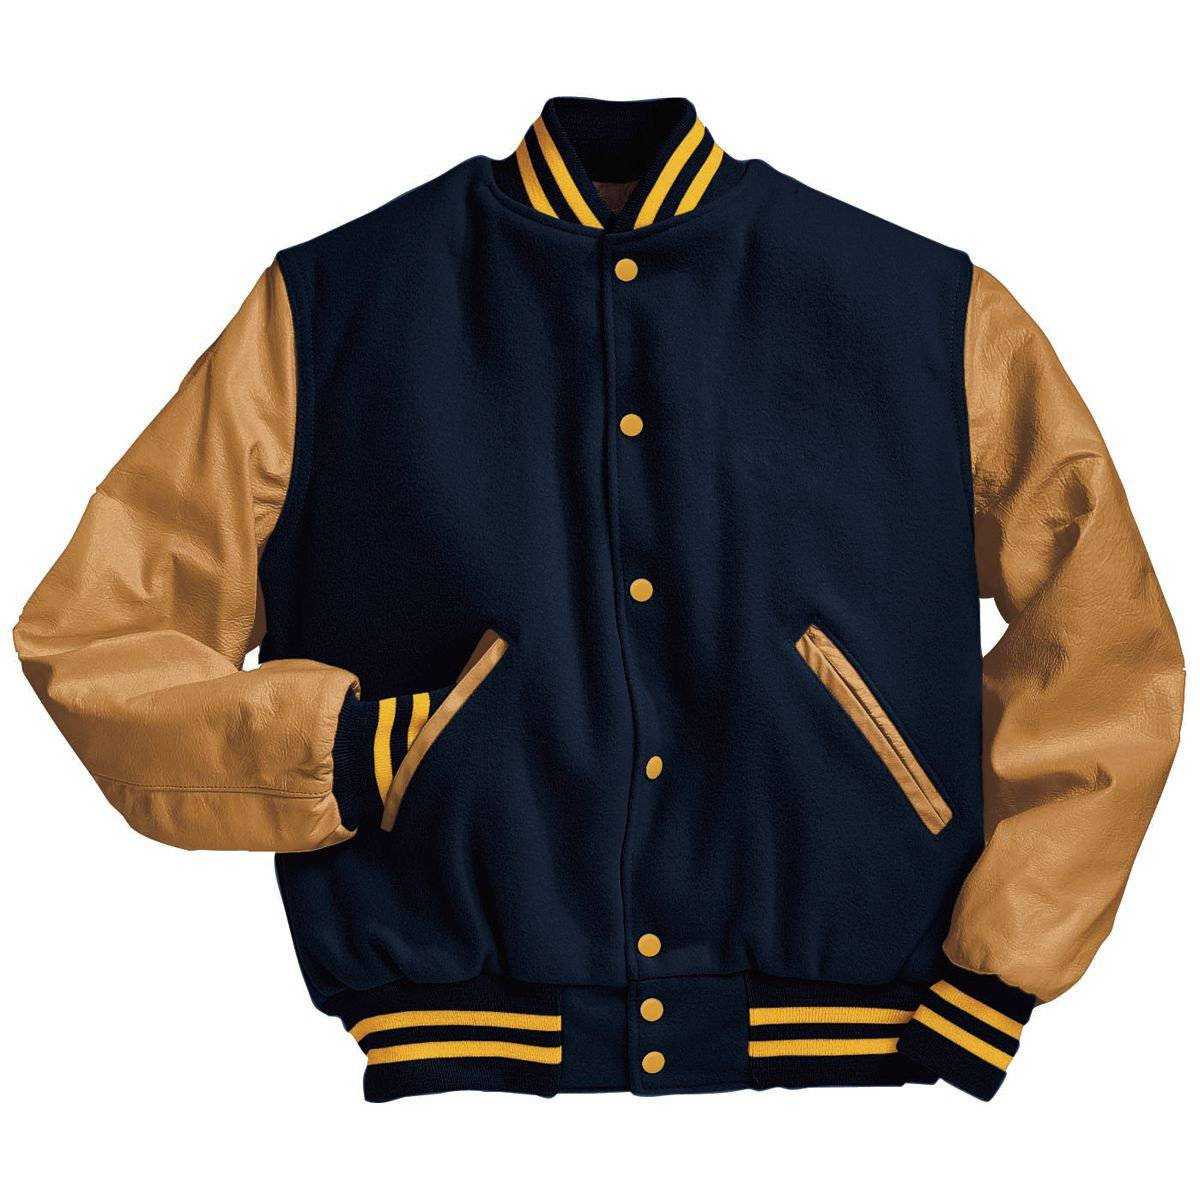 Holloway 224183 Varsity (Wool, Leather Sleeves) -DK Ny Lt Gold Lt Gold - HIT a Double